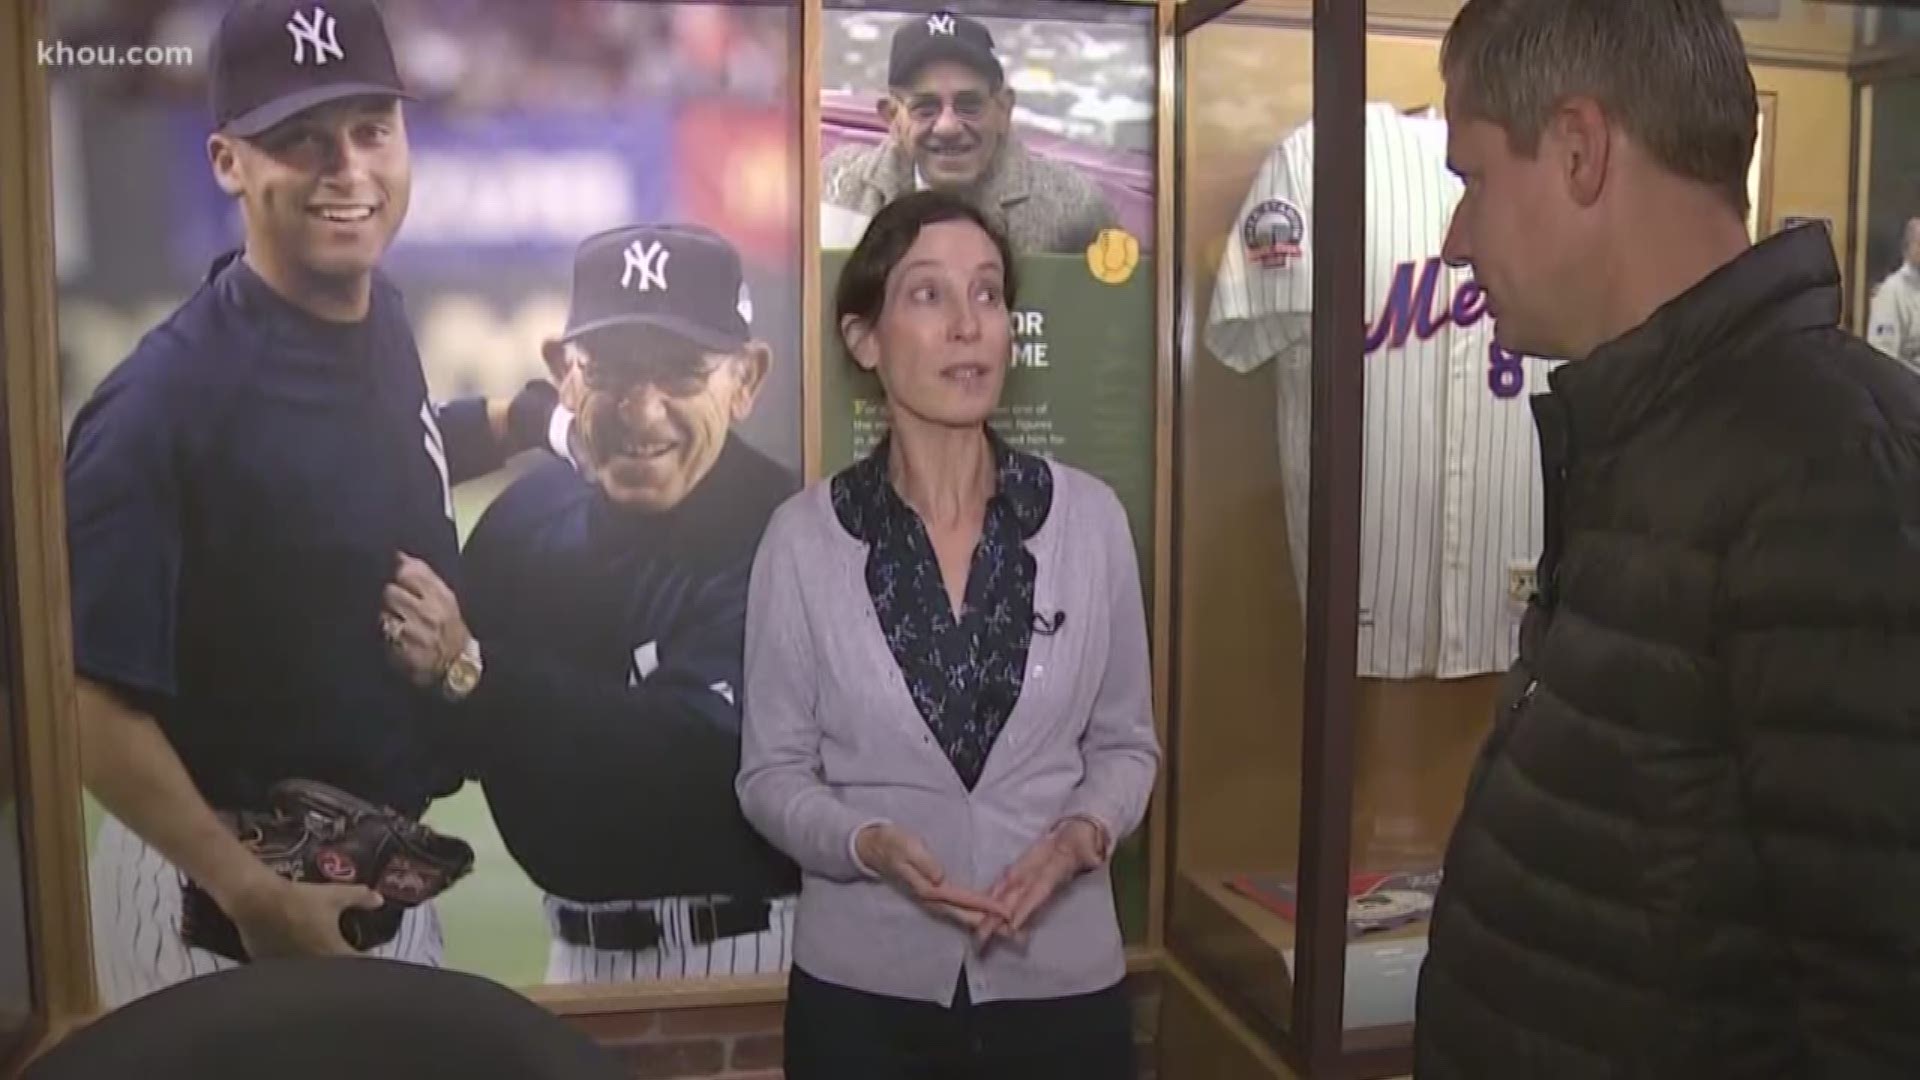 KHOU 11 Sports' Jason Bristol visits the museum in New Jersey dedicated to former Yankees All-Star and Astros coach Yogi Berra.